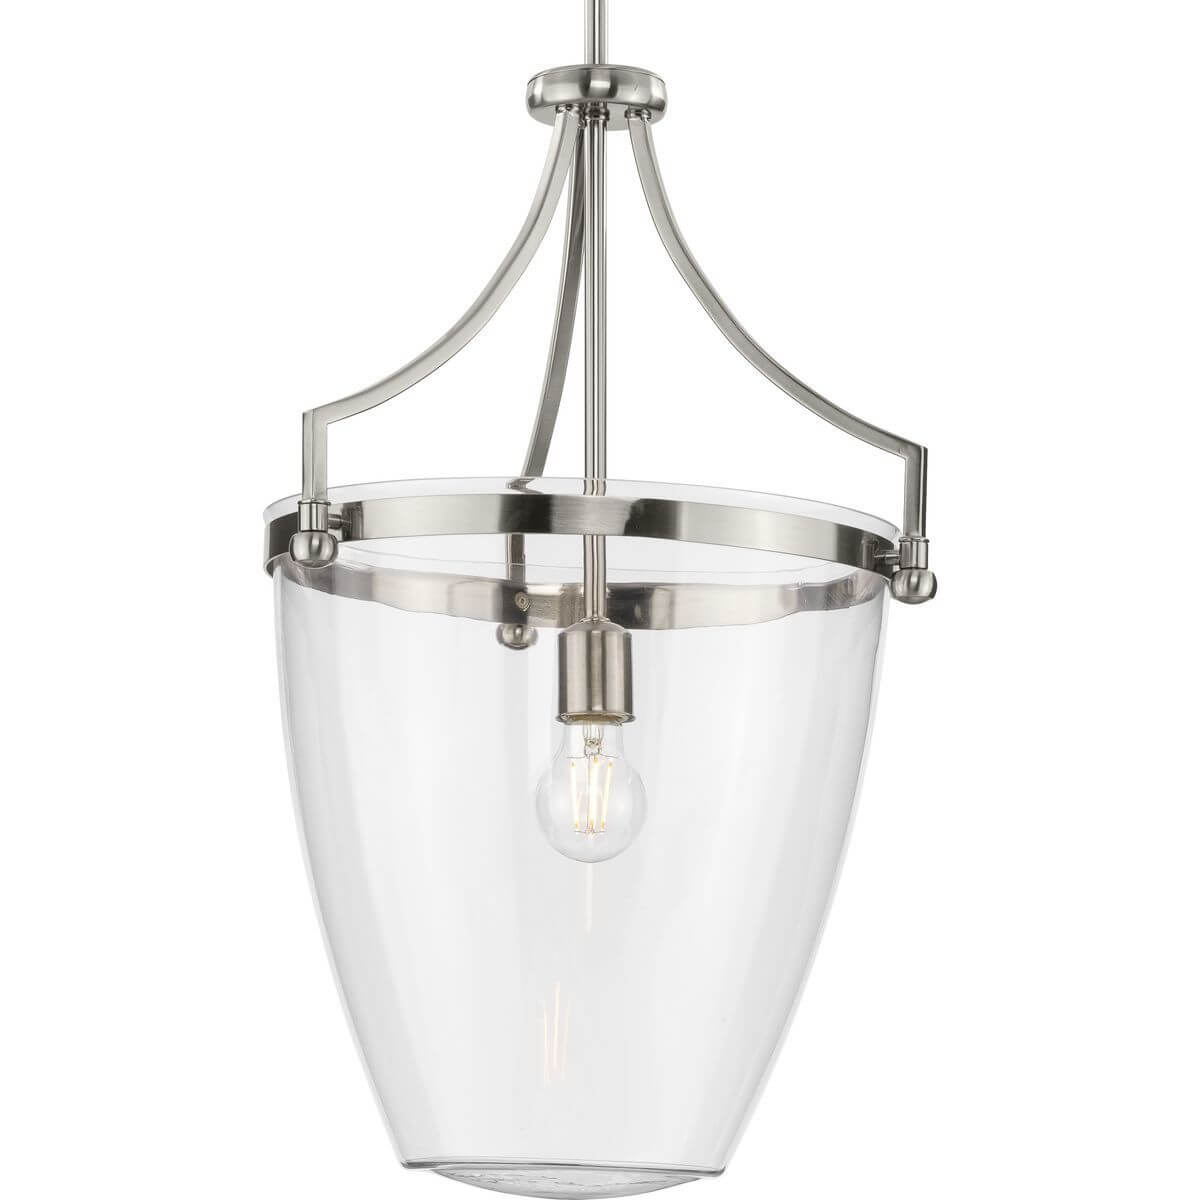 Progress Lighting P500361-009 Parkhurst 1 Light 15 inch Pendant in Brushed Nickel with Clear Glass